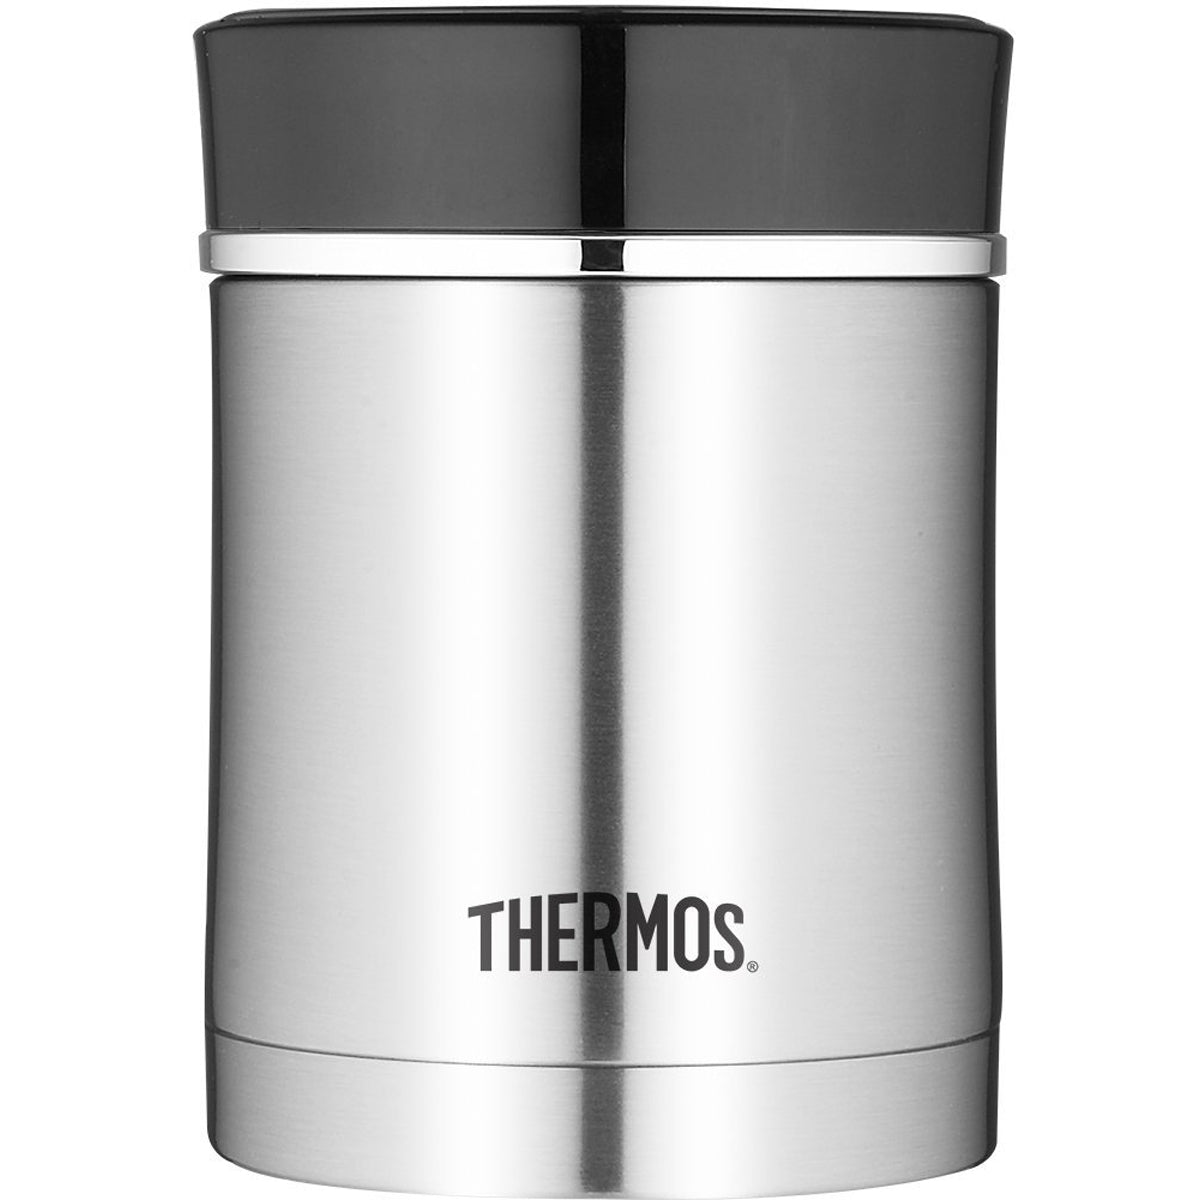 Thermos 16 oz. Sipp Vacuum Insulated Stainless Steel Food Jar - Silver/Black Thermos